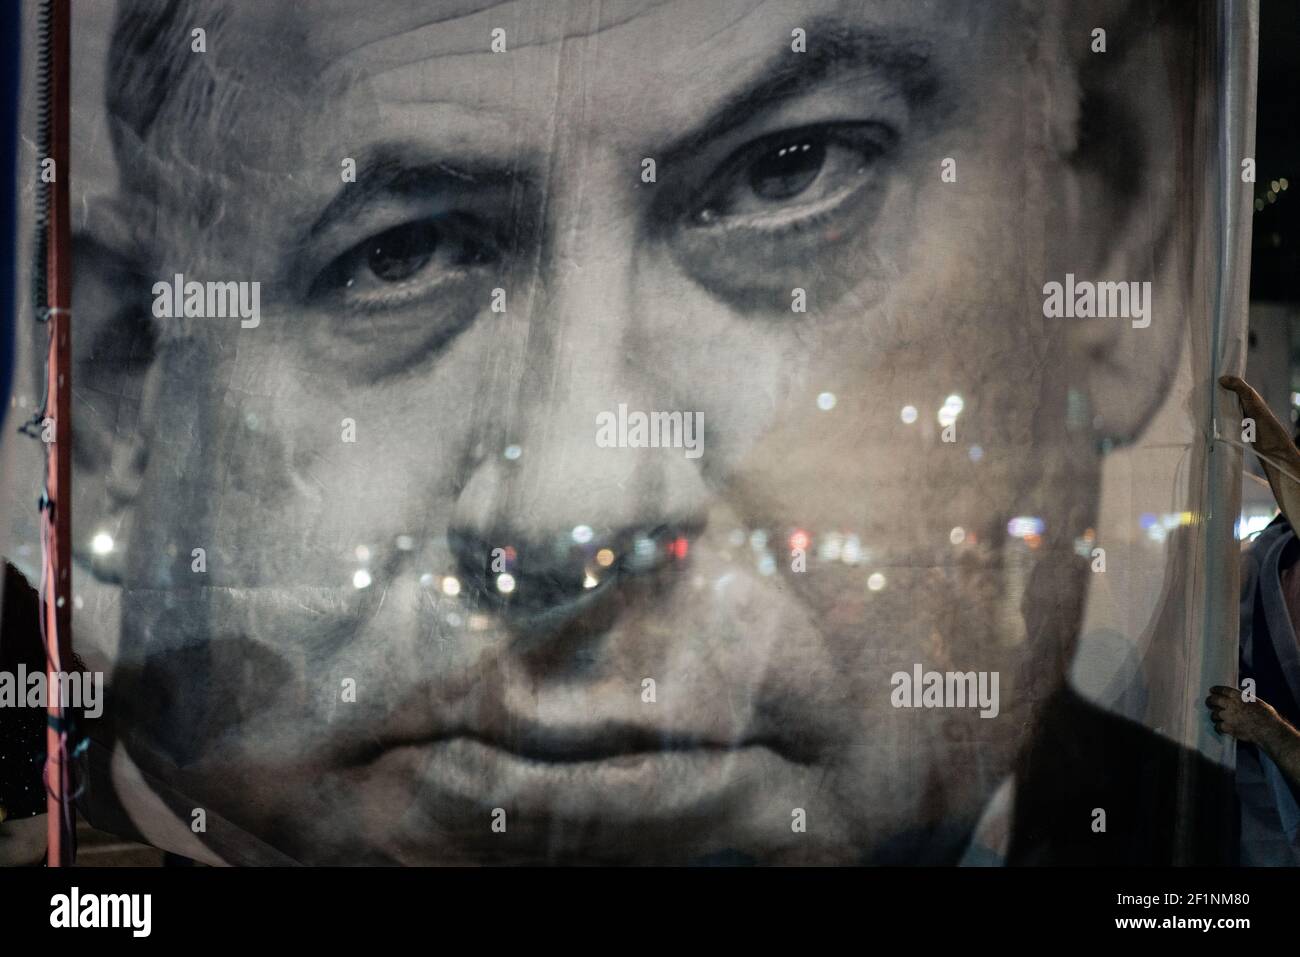 TEL AVIV, ISRAEL - Aug 09, 2018: A banner of Israeli Prime Minister Benjamin Netanyahu at a protest demanding his resignation over corruption charges Stock Photo